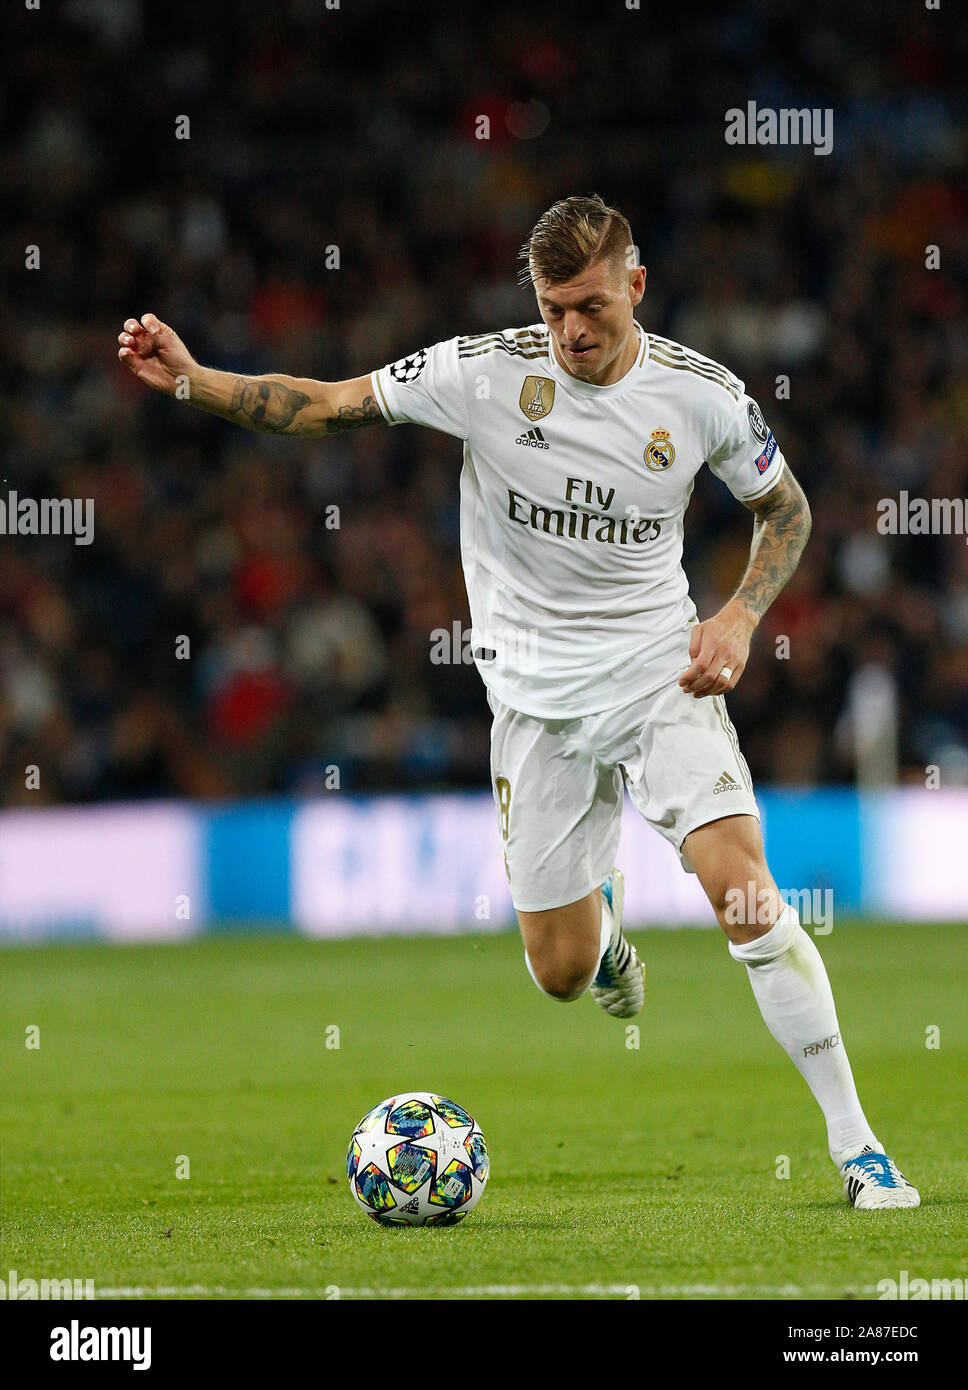 Madrid, Spain. 06th Nov, 2019. Real Madrid CF's Toni Kroos during the UEFA Champions  League match between Real Madrid and Galatasaray SK at the Santiago  Bernabeu in Madrid.(Final Score: Real Madrid 6 -